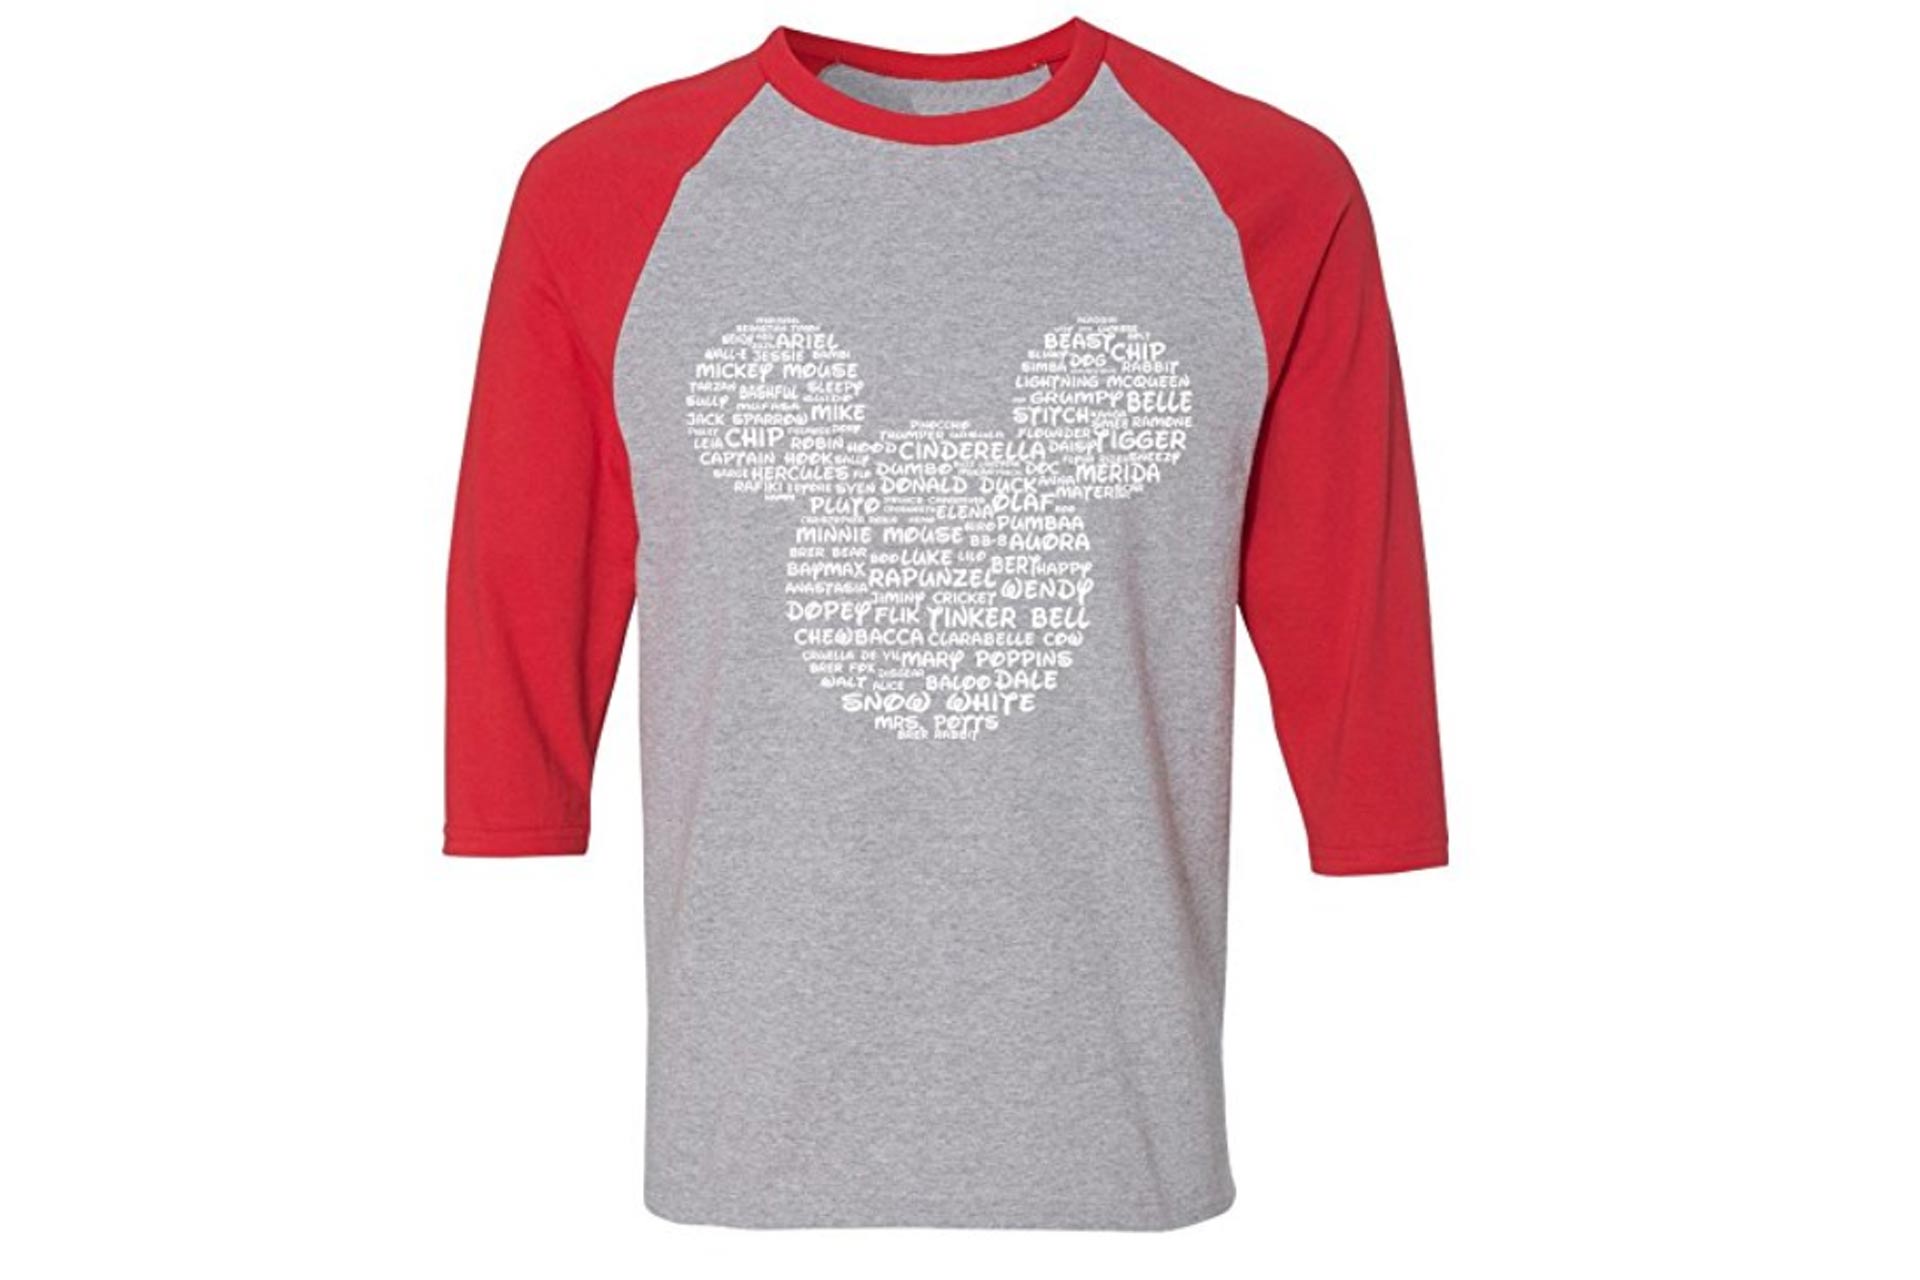 DisGear's Name That Disney Character Tee